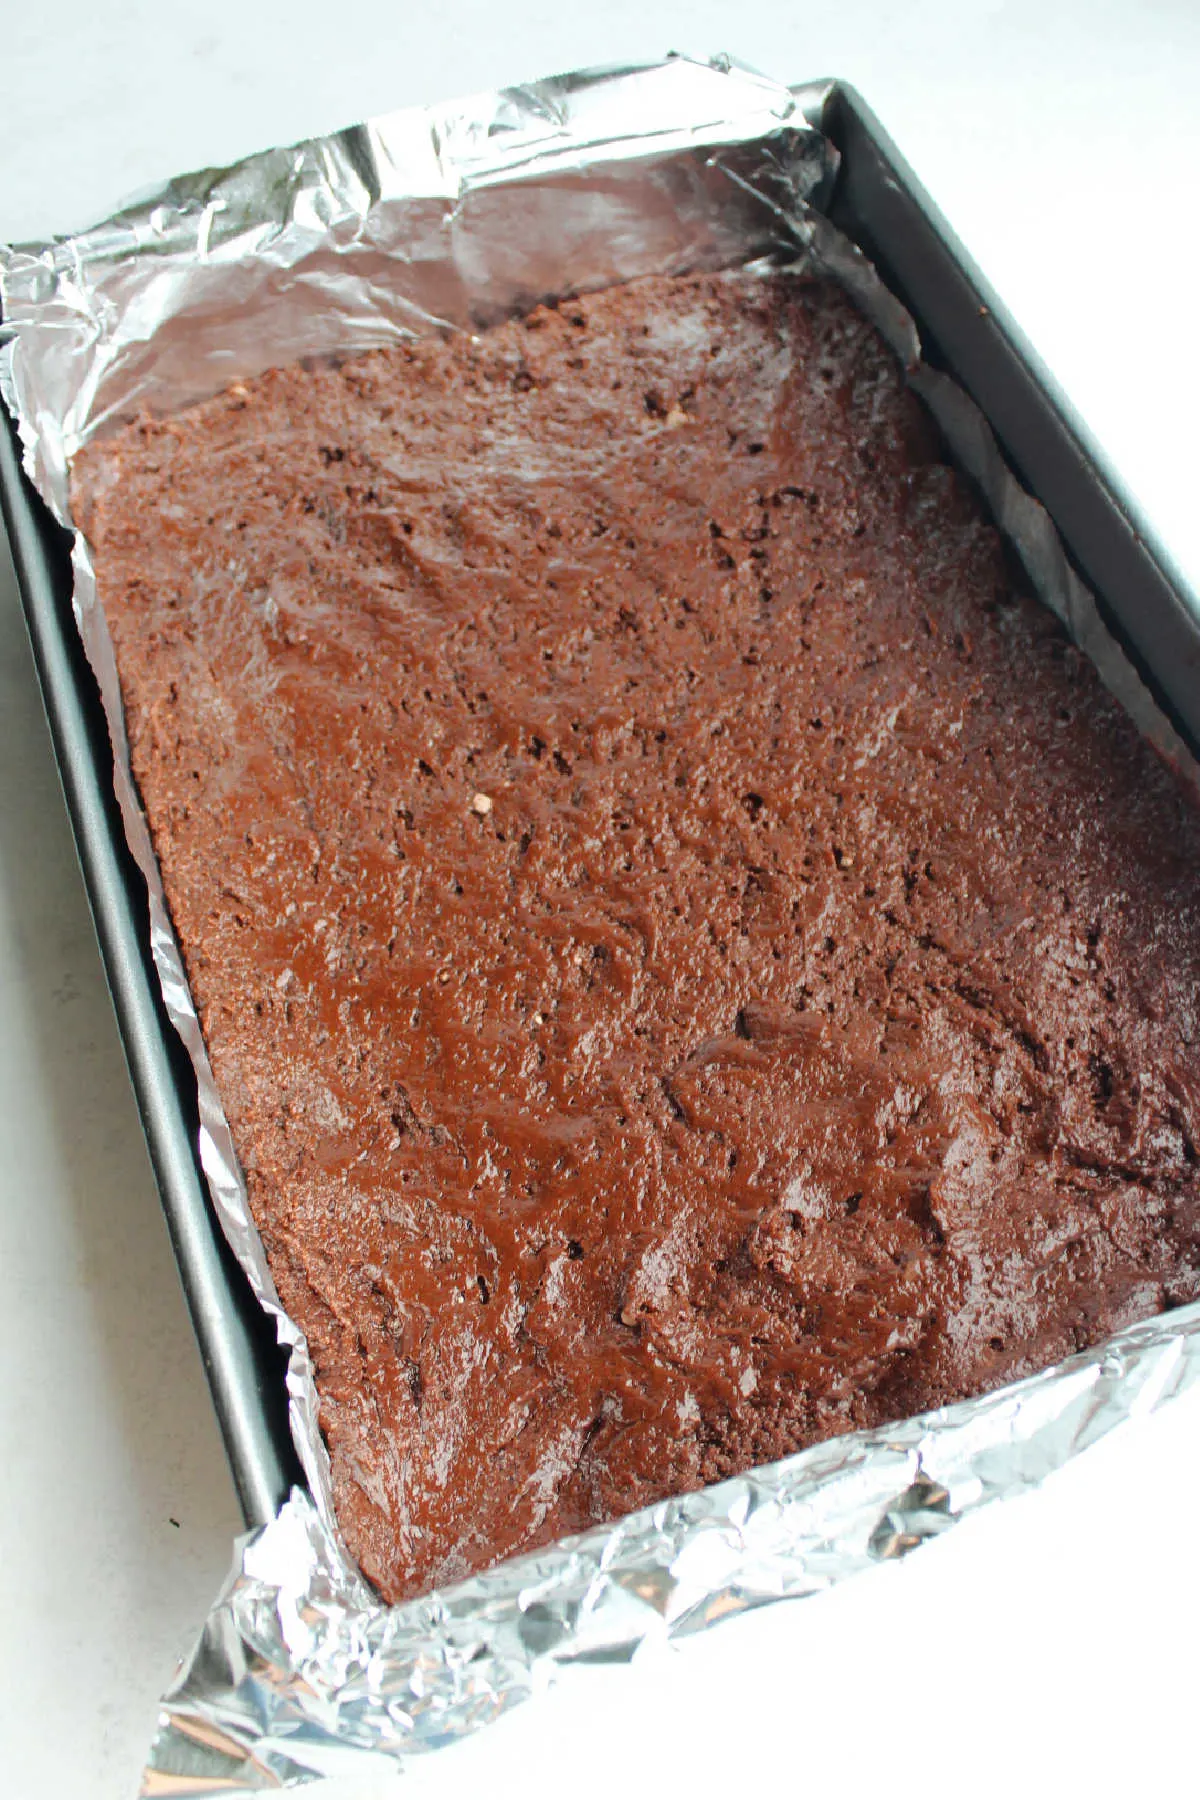 chocolate crust pressed into 9x13-inch pan.